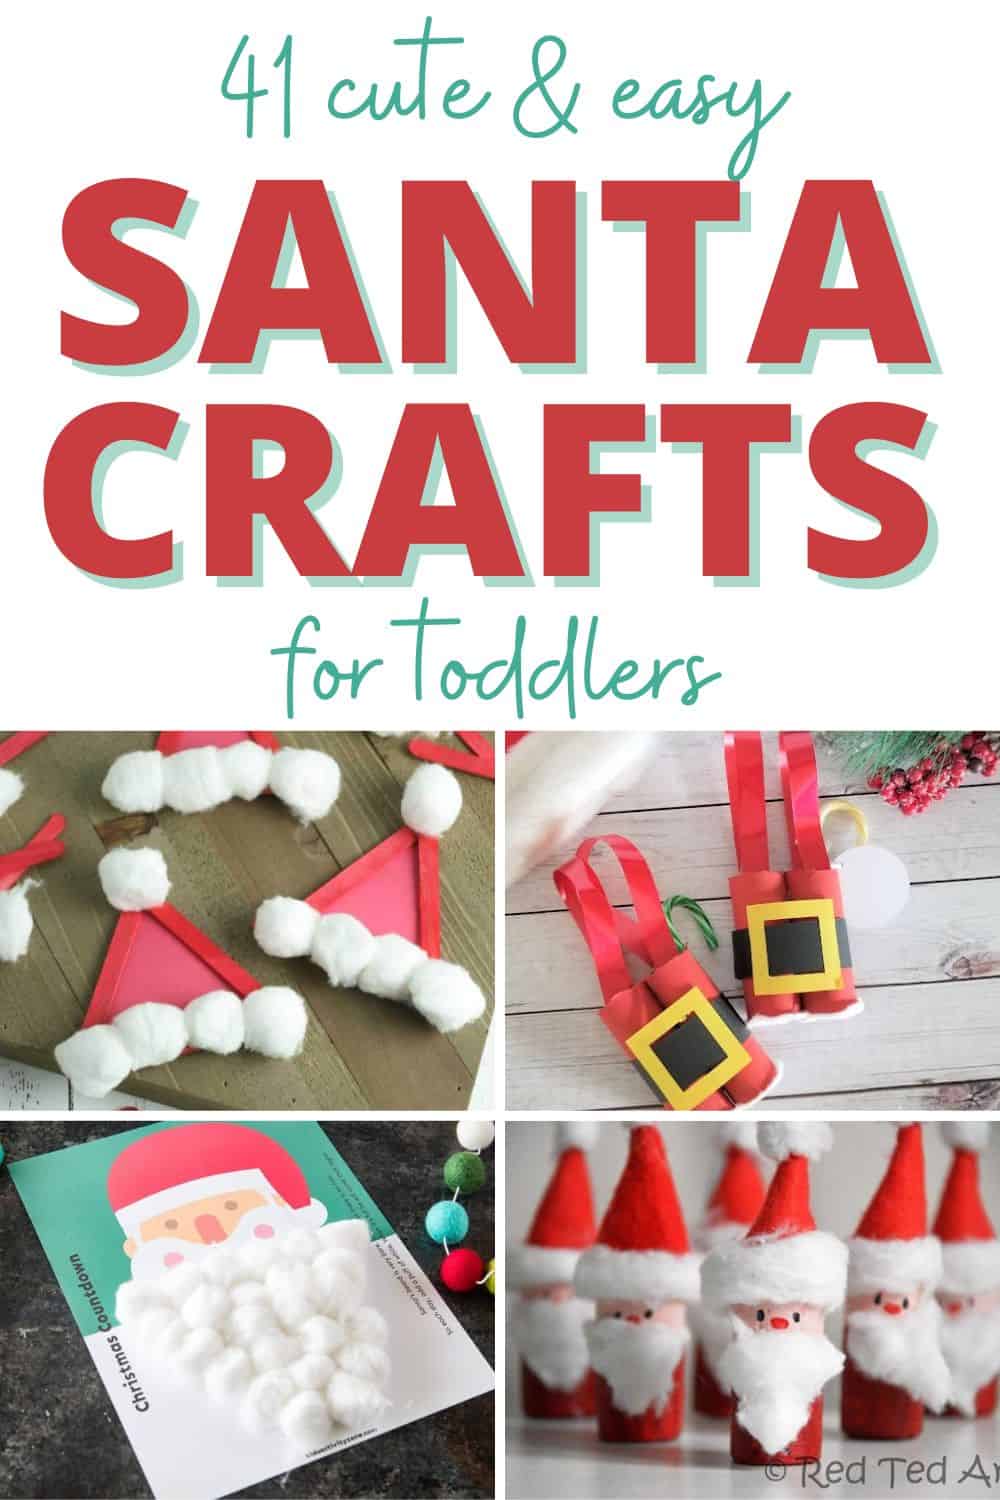 41 Easy Santa Claus crafts for toddlers (inc. Santa hat crafts)